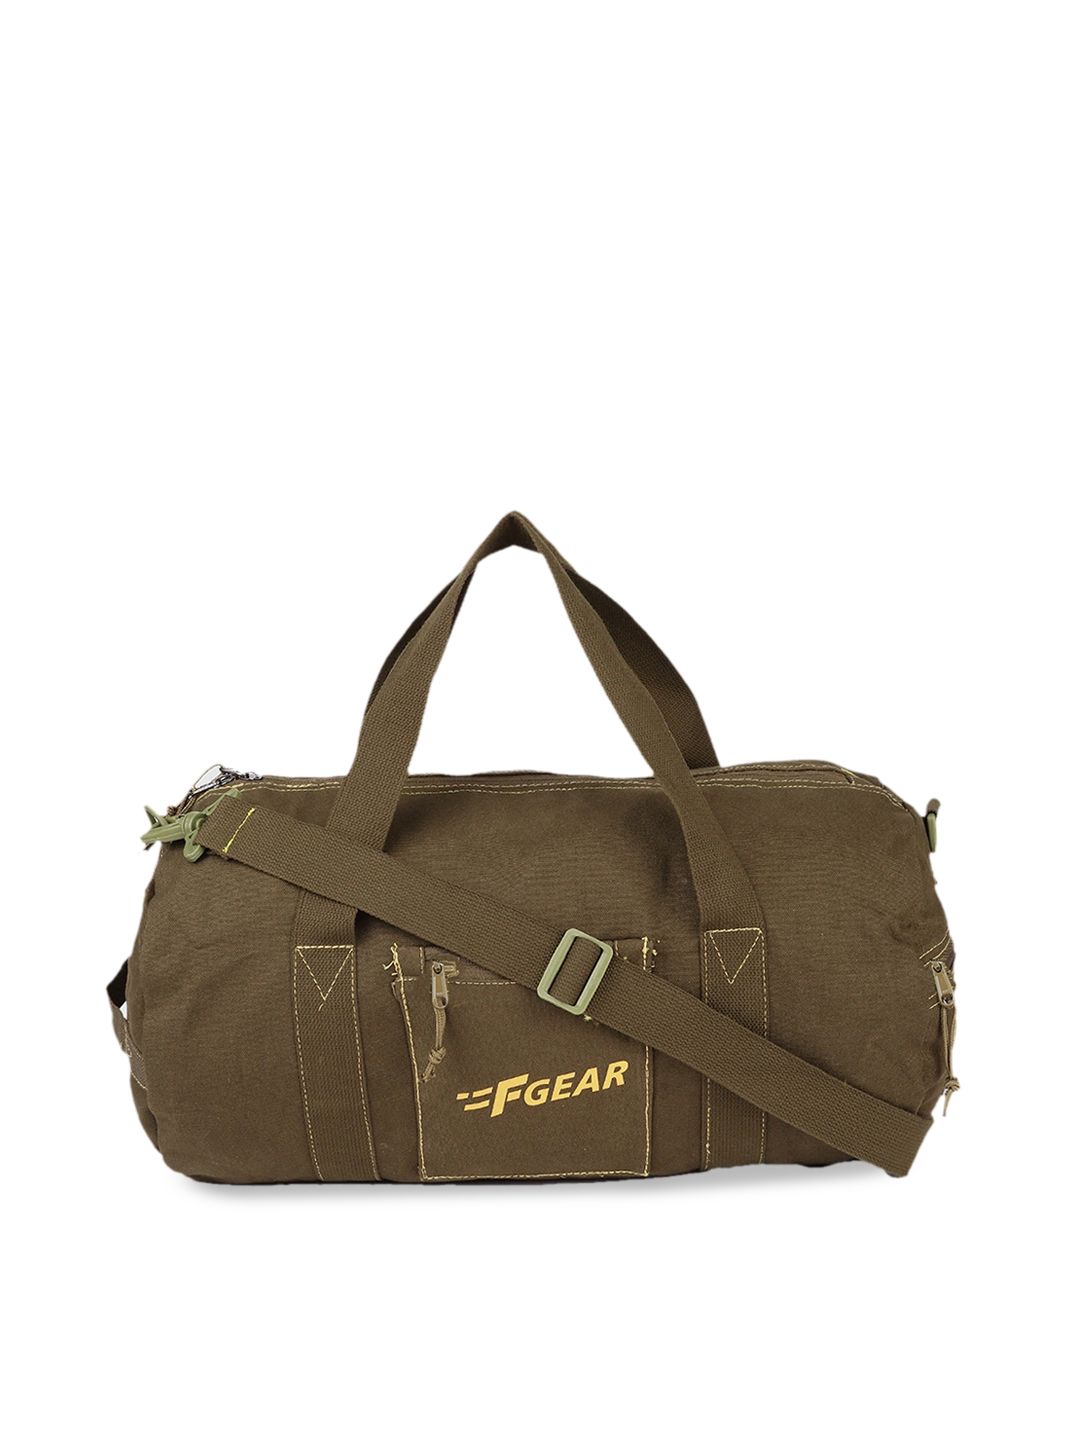 F Gear Unisex Olive Green Duffel Bag Price in India